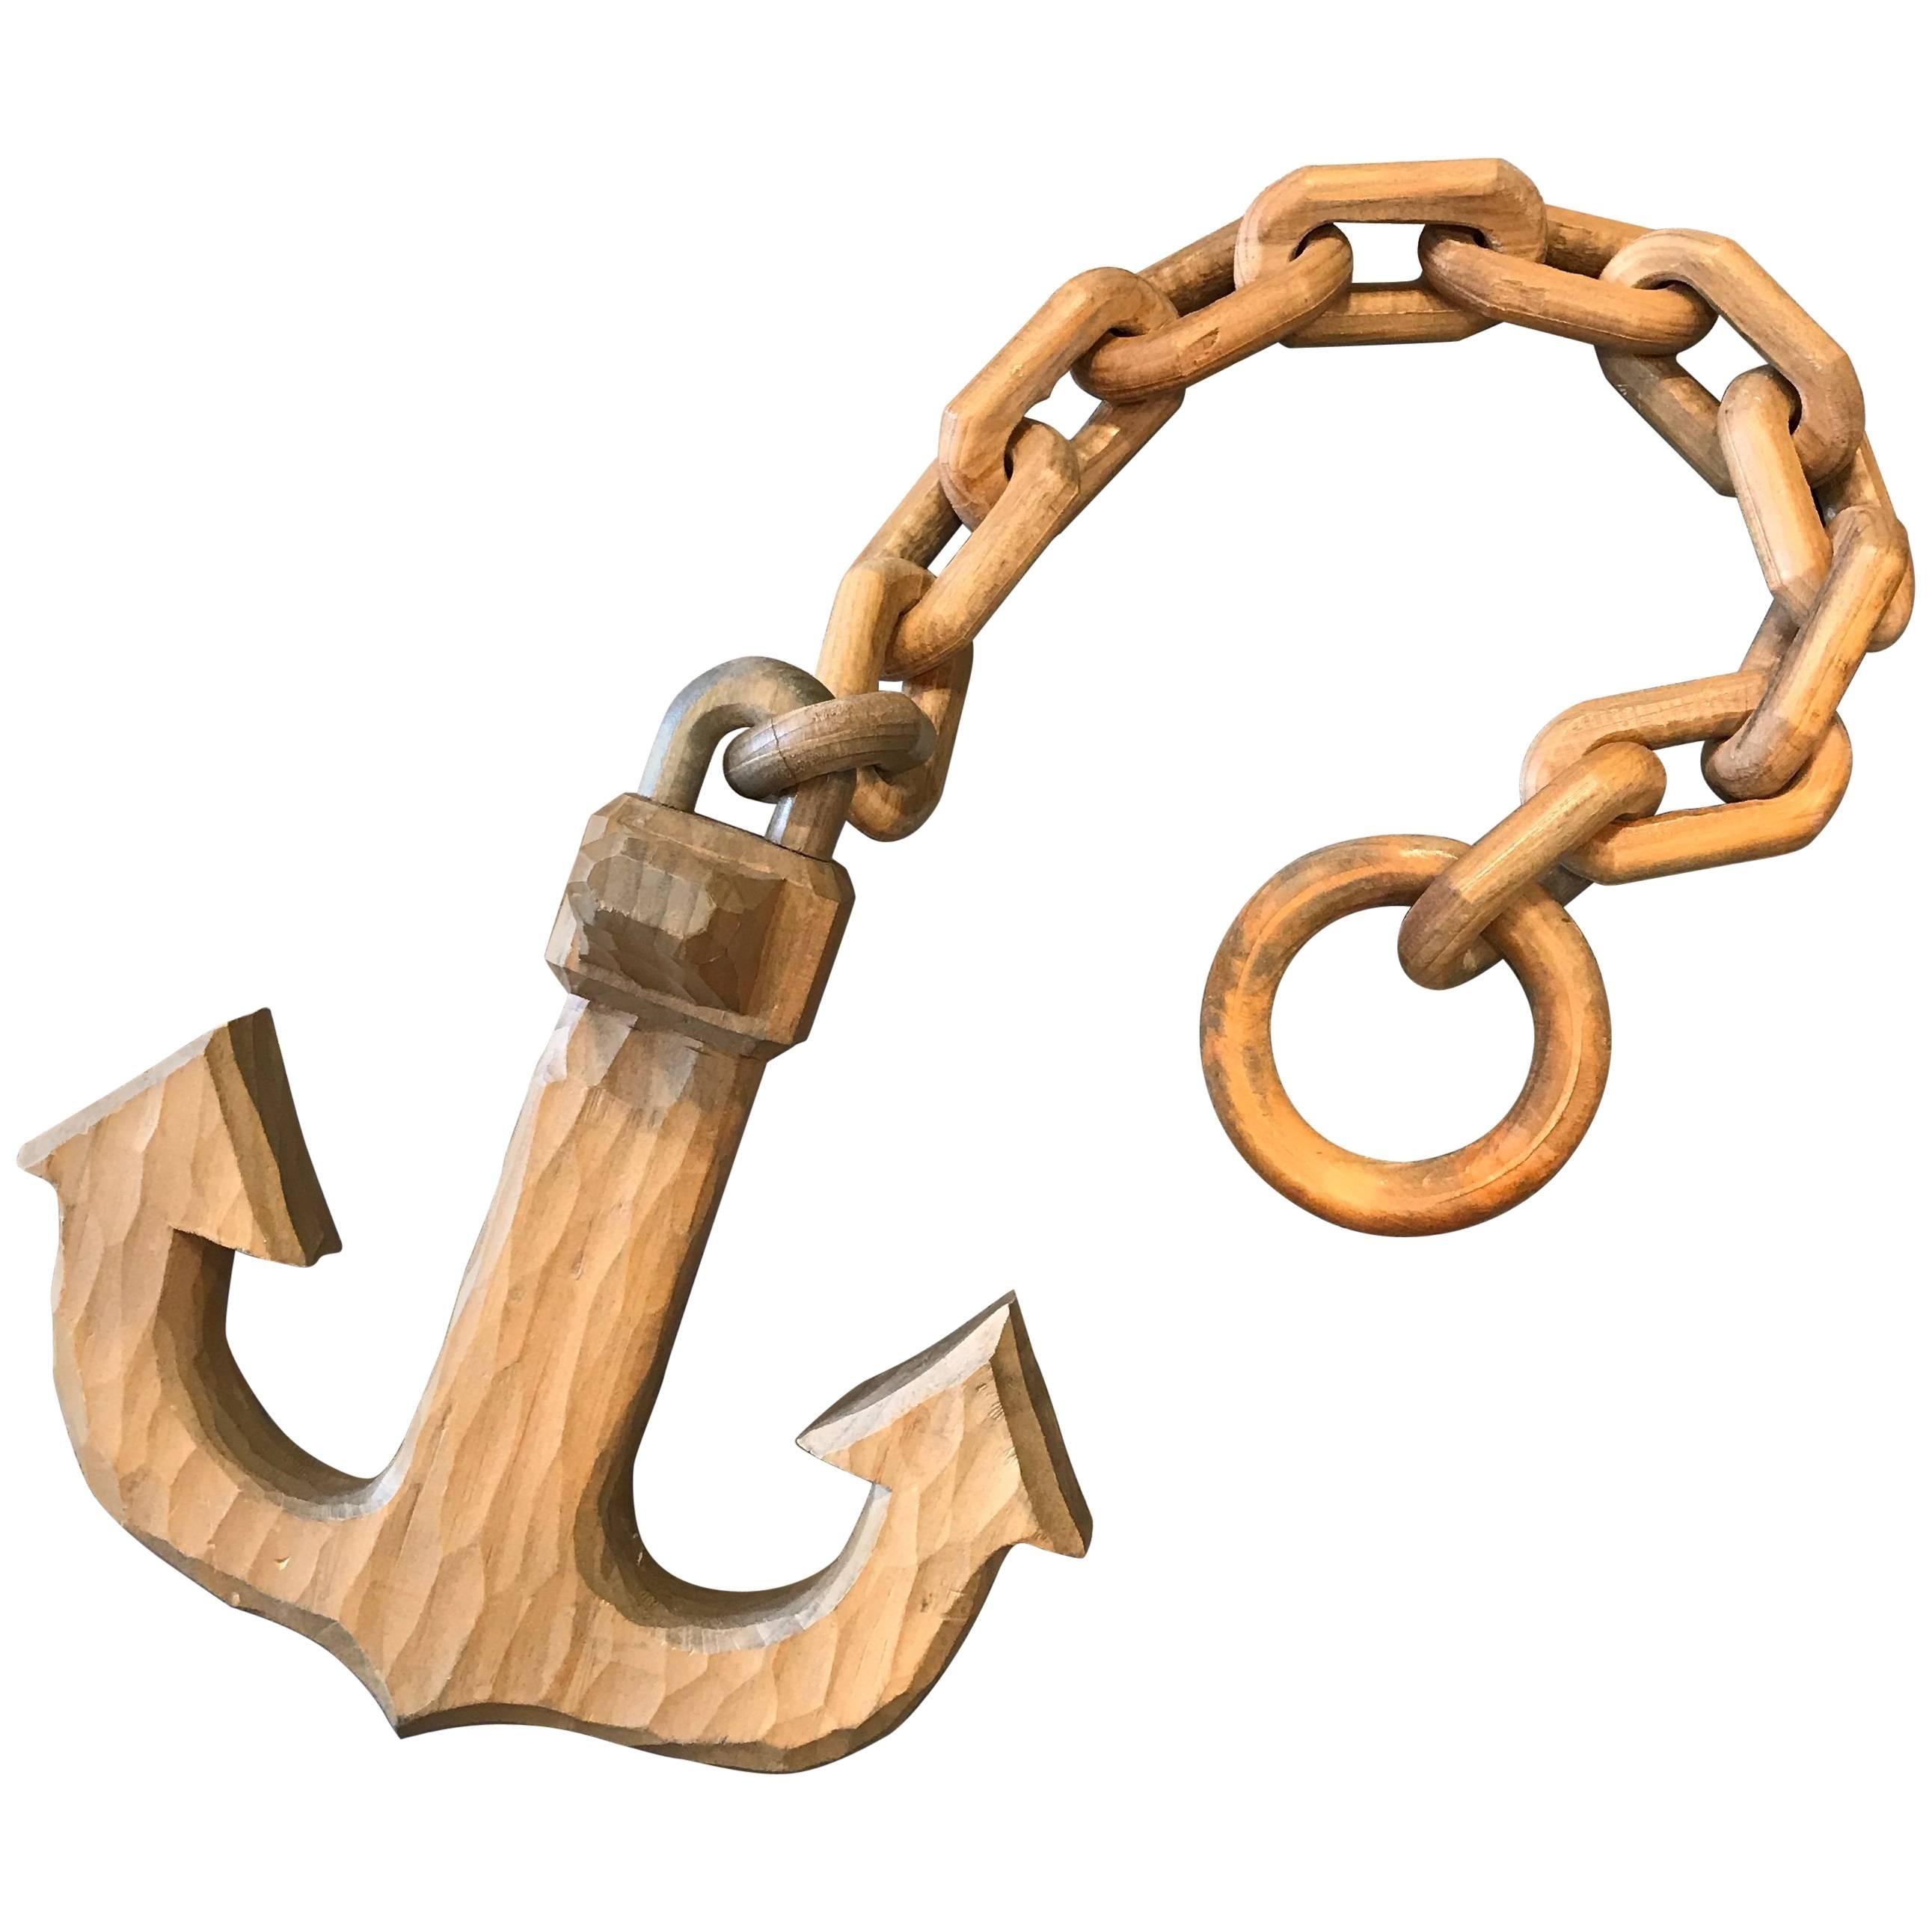 Nautical Folk Art Hand-Carved Wooden Boat Anchor and Chain For Sale